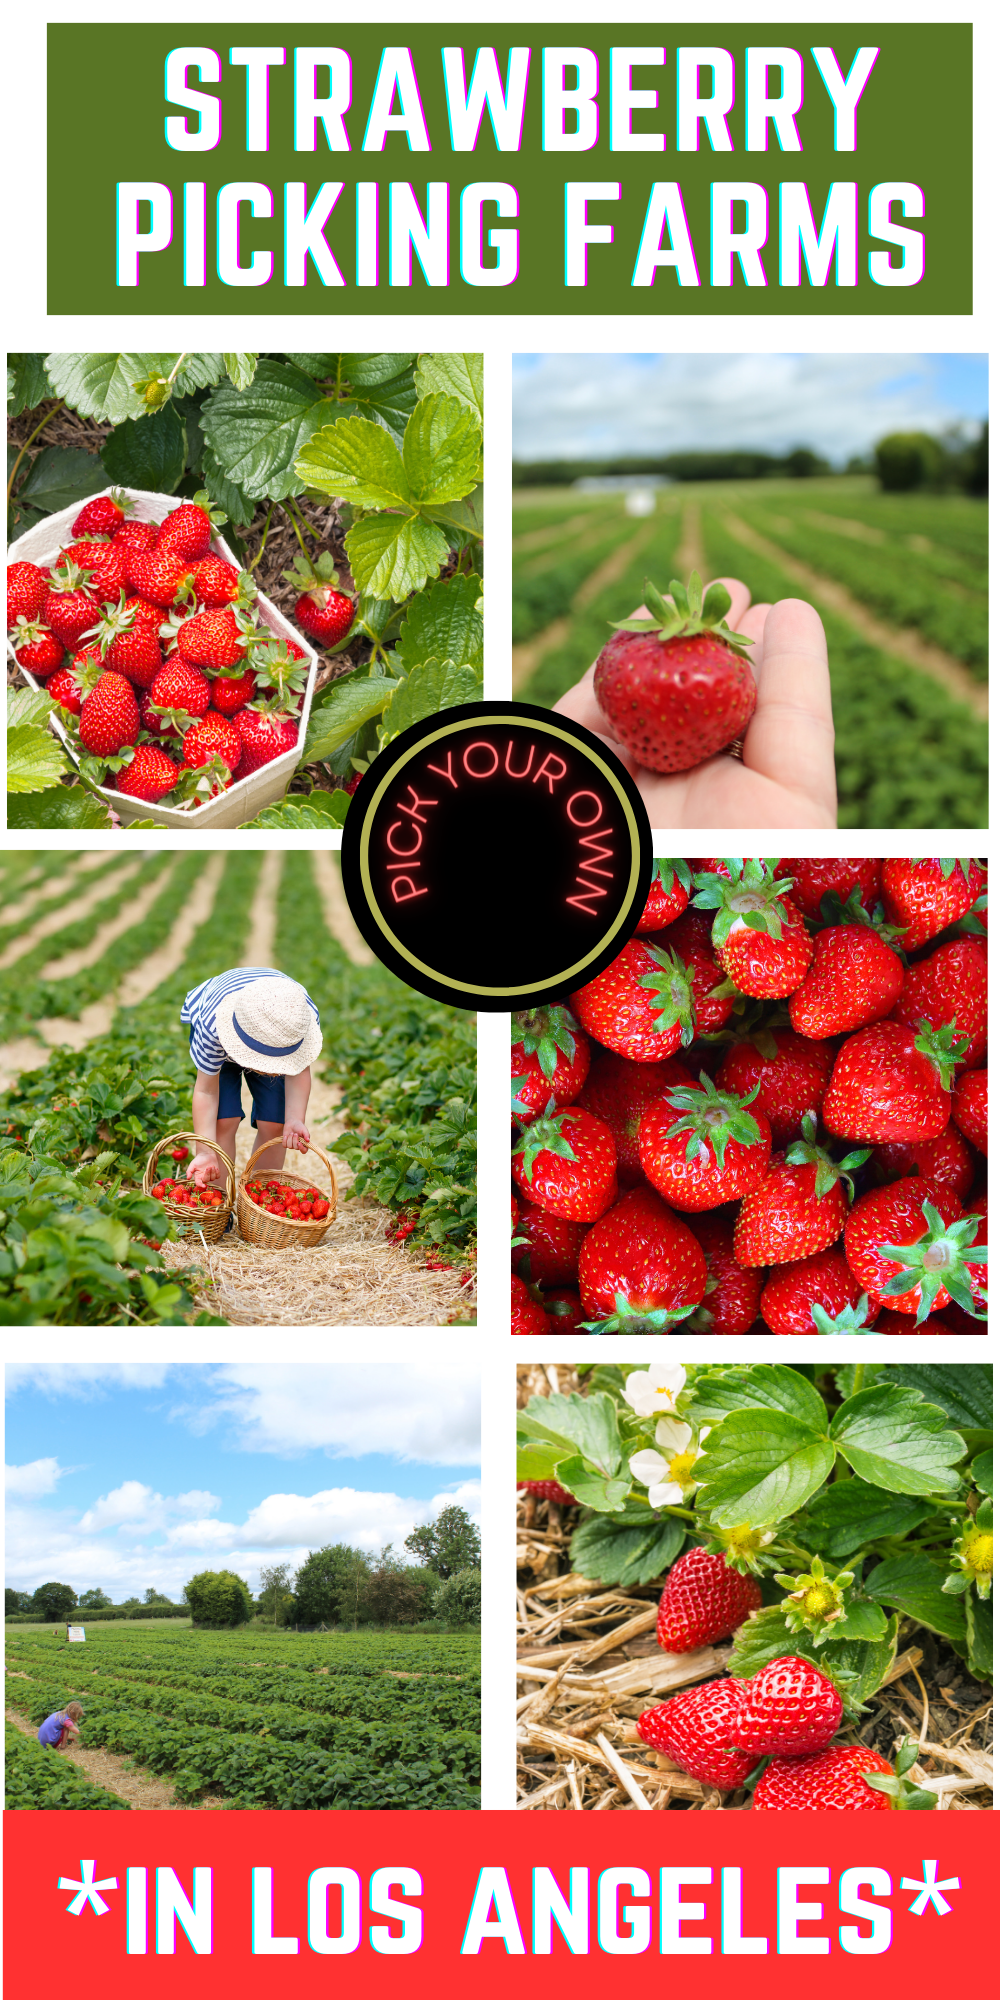 Strawberry Picking Farms Los Angeles